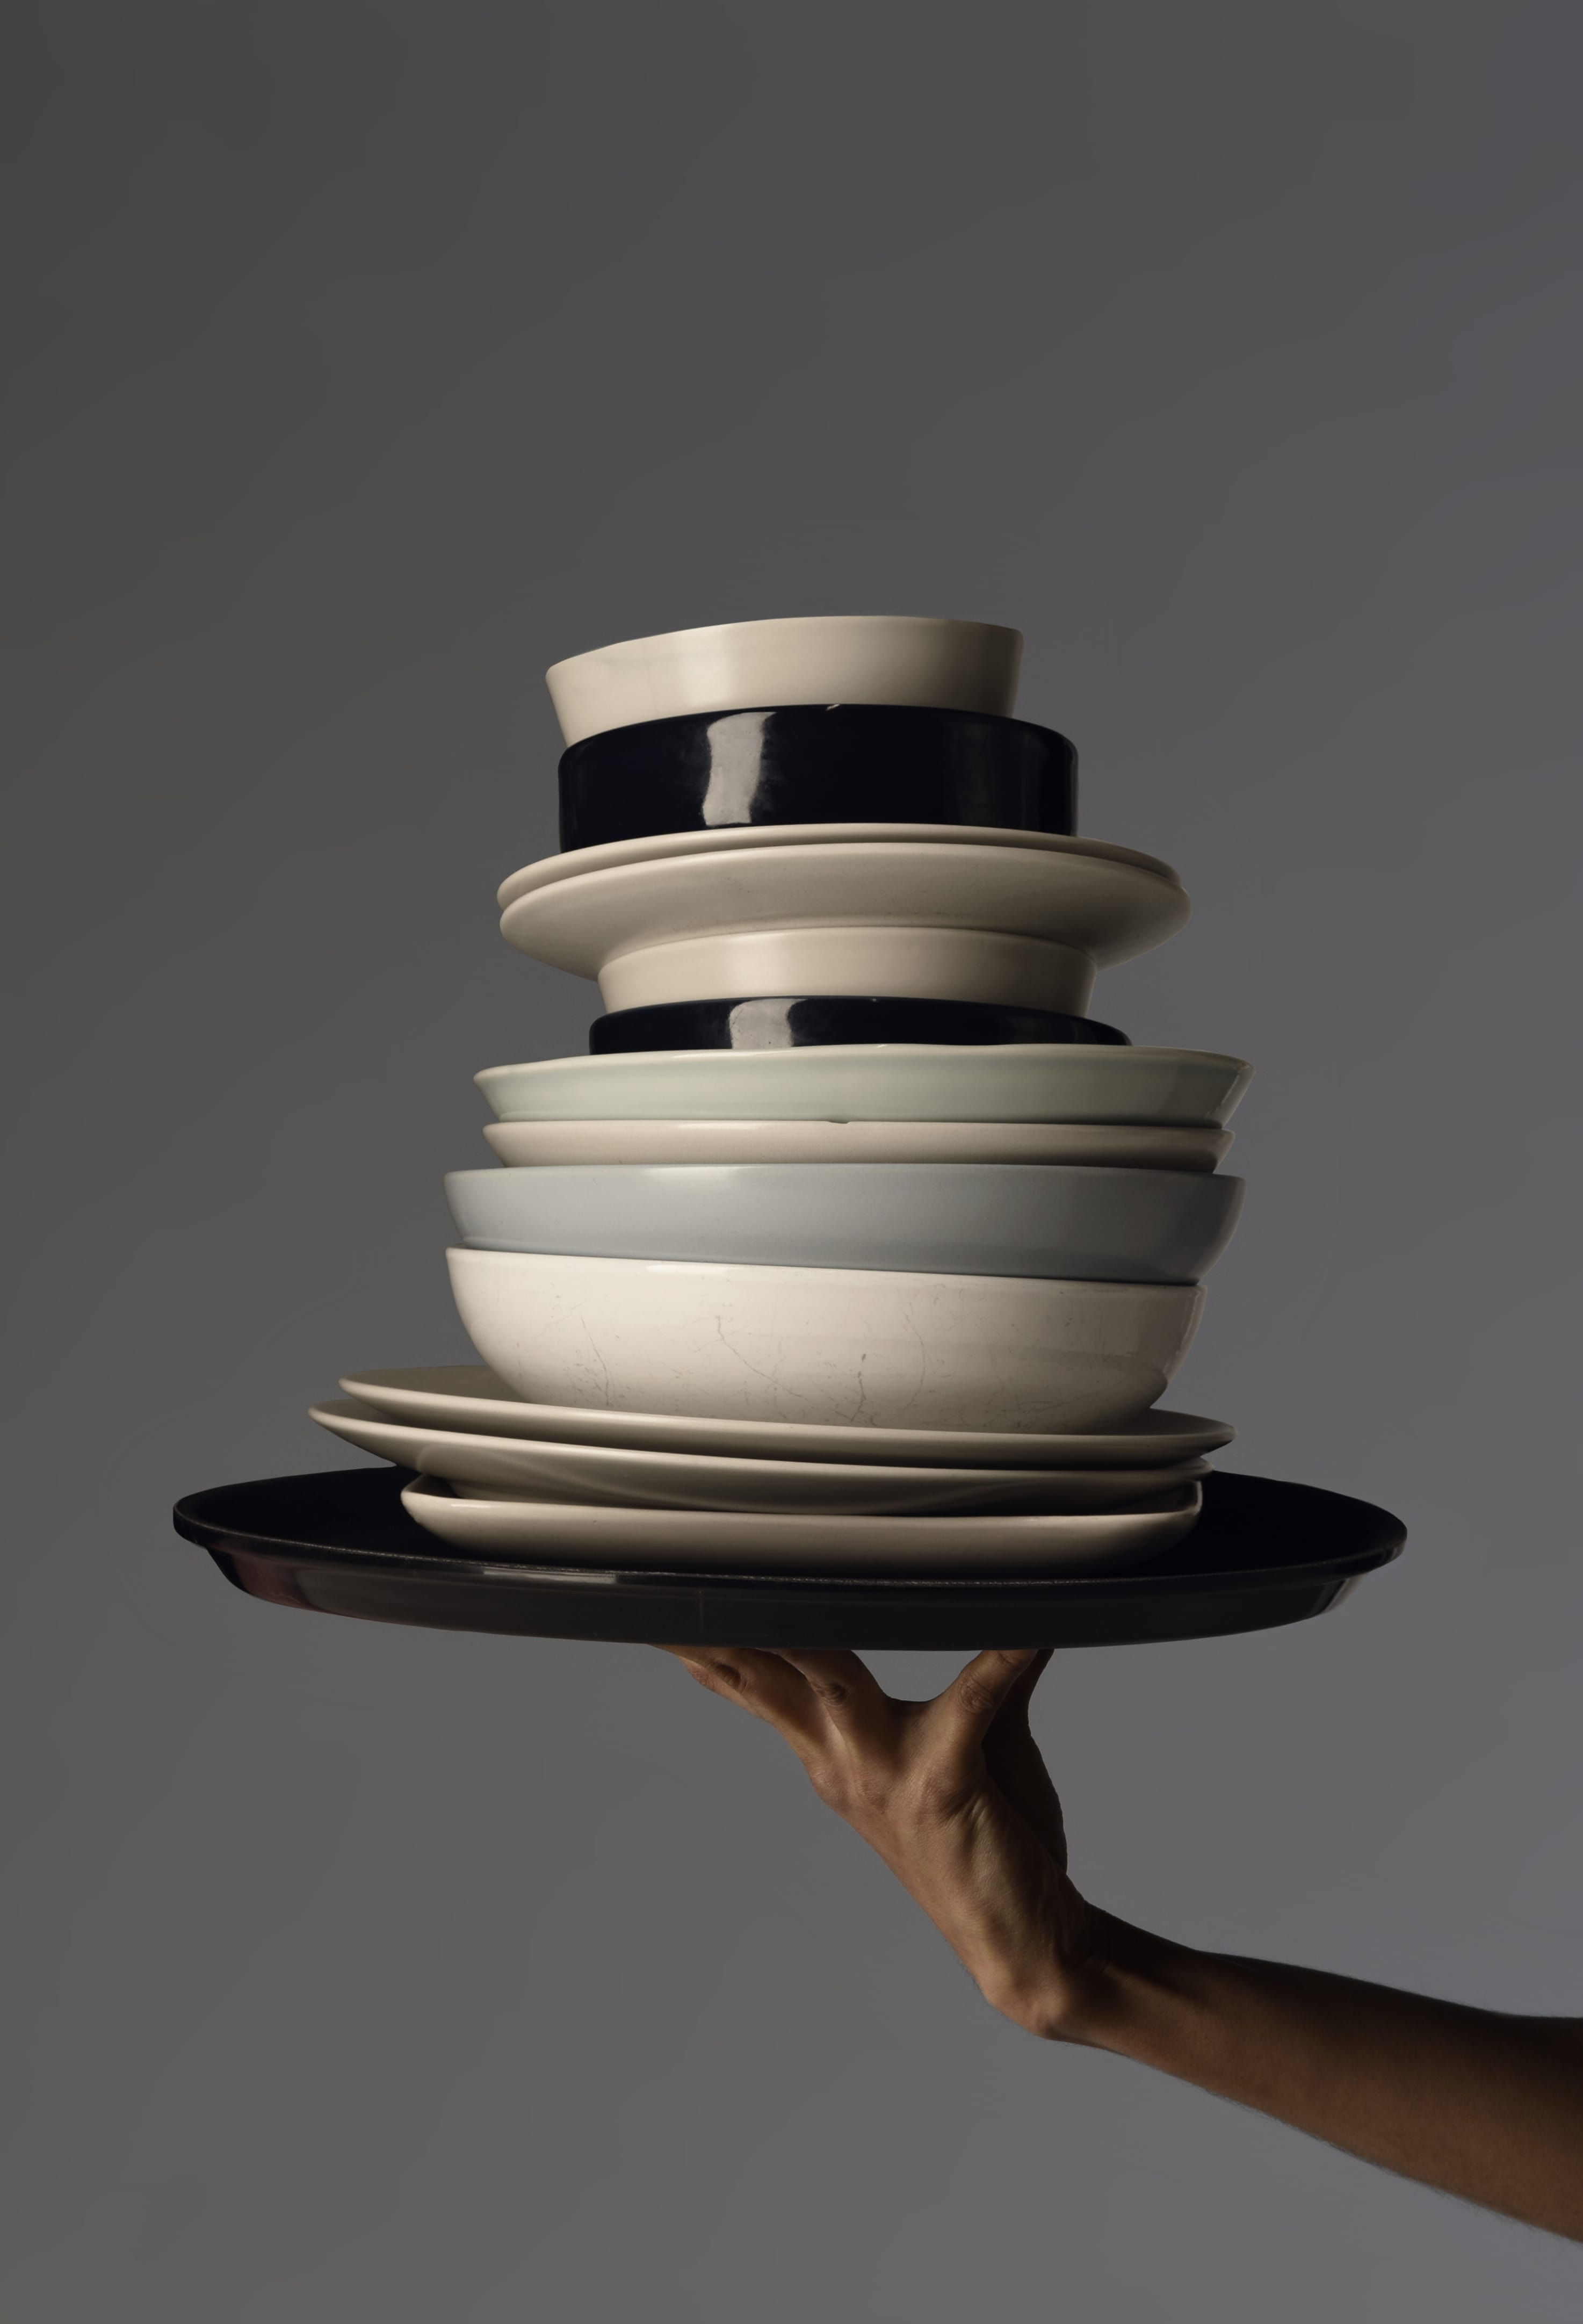 Image of stack of plates in a tray held by a single hand